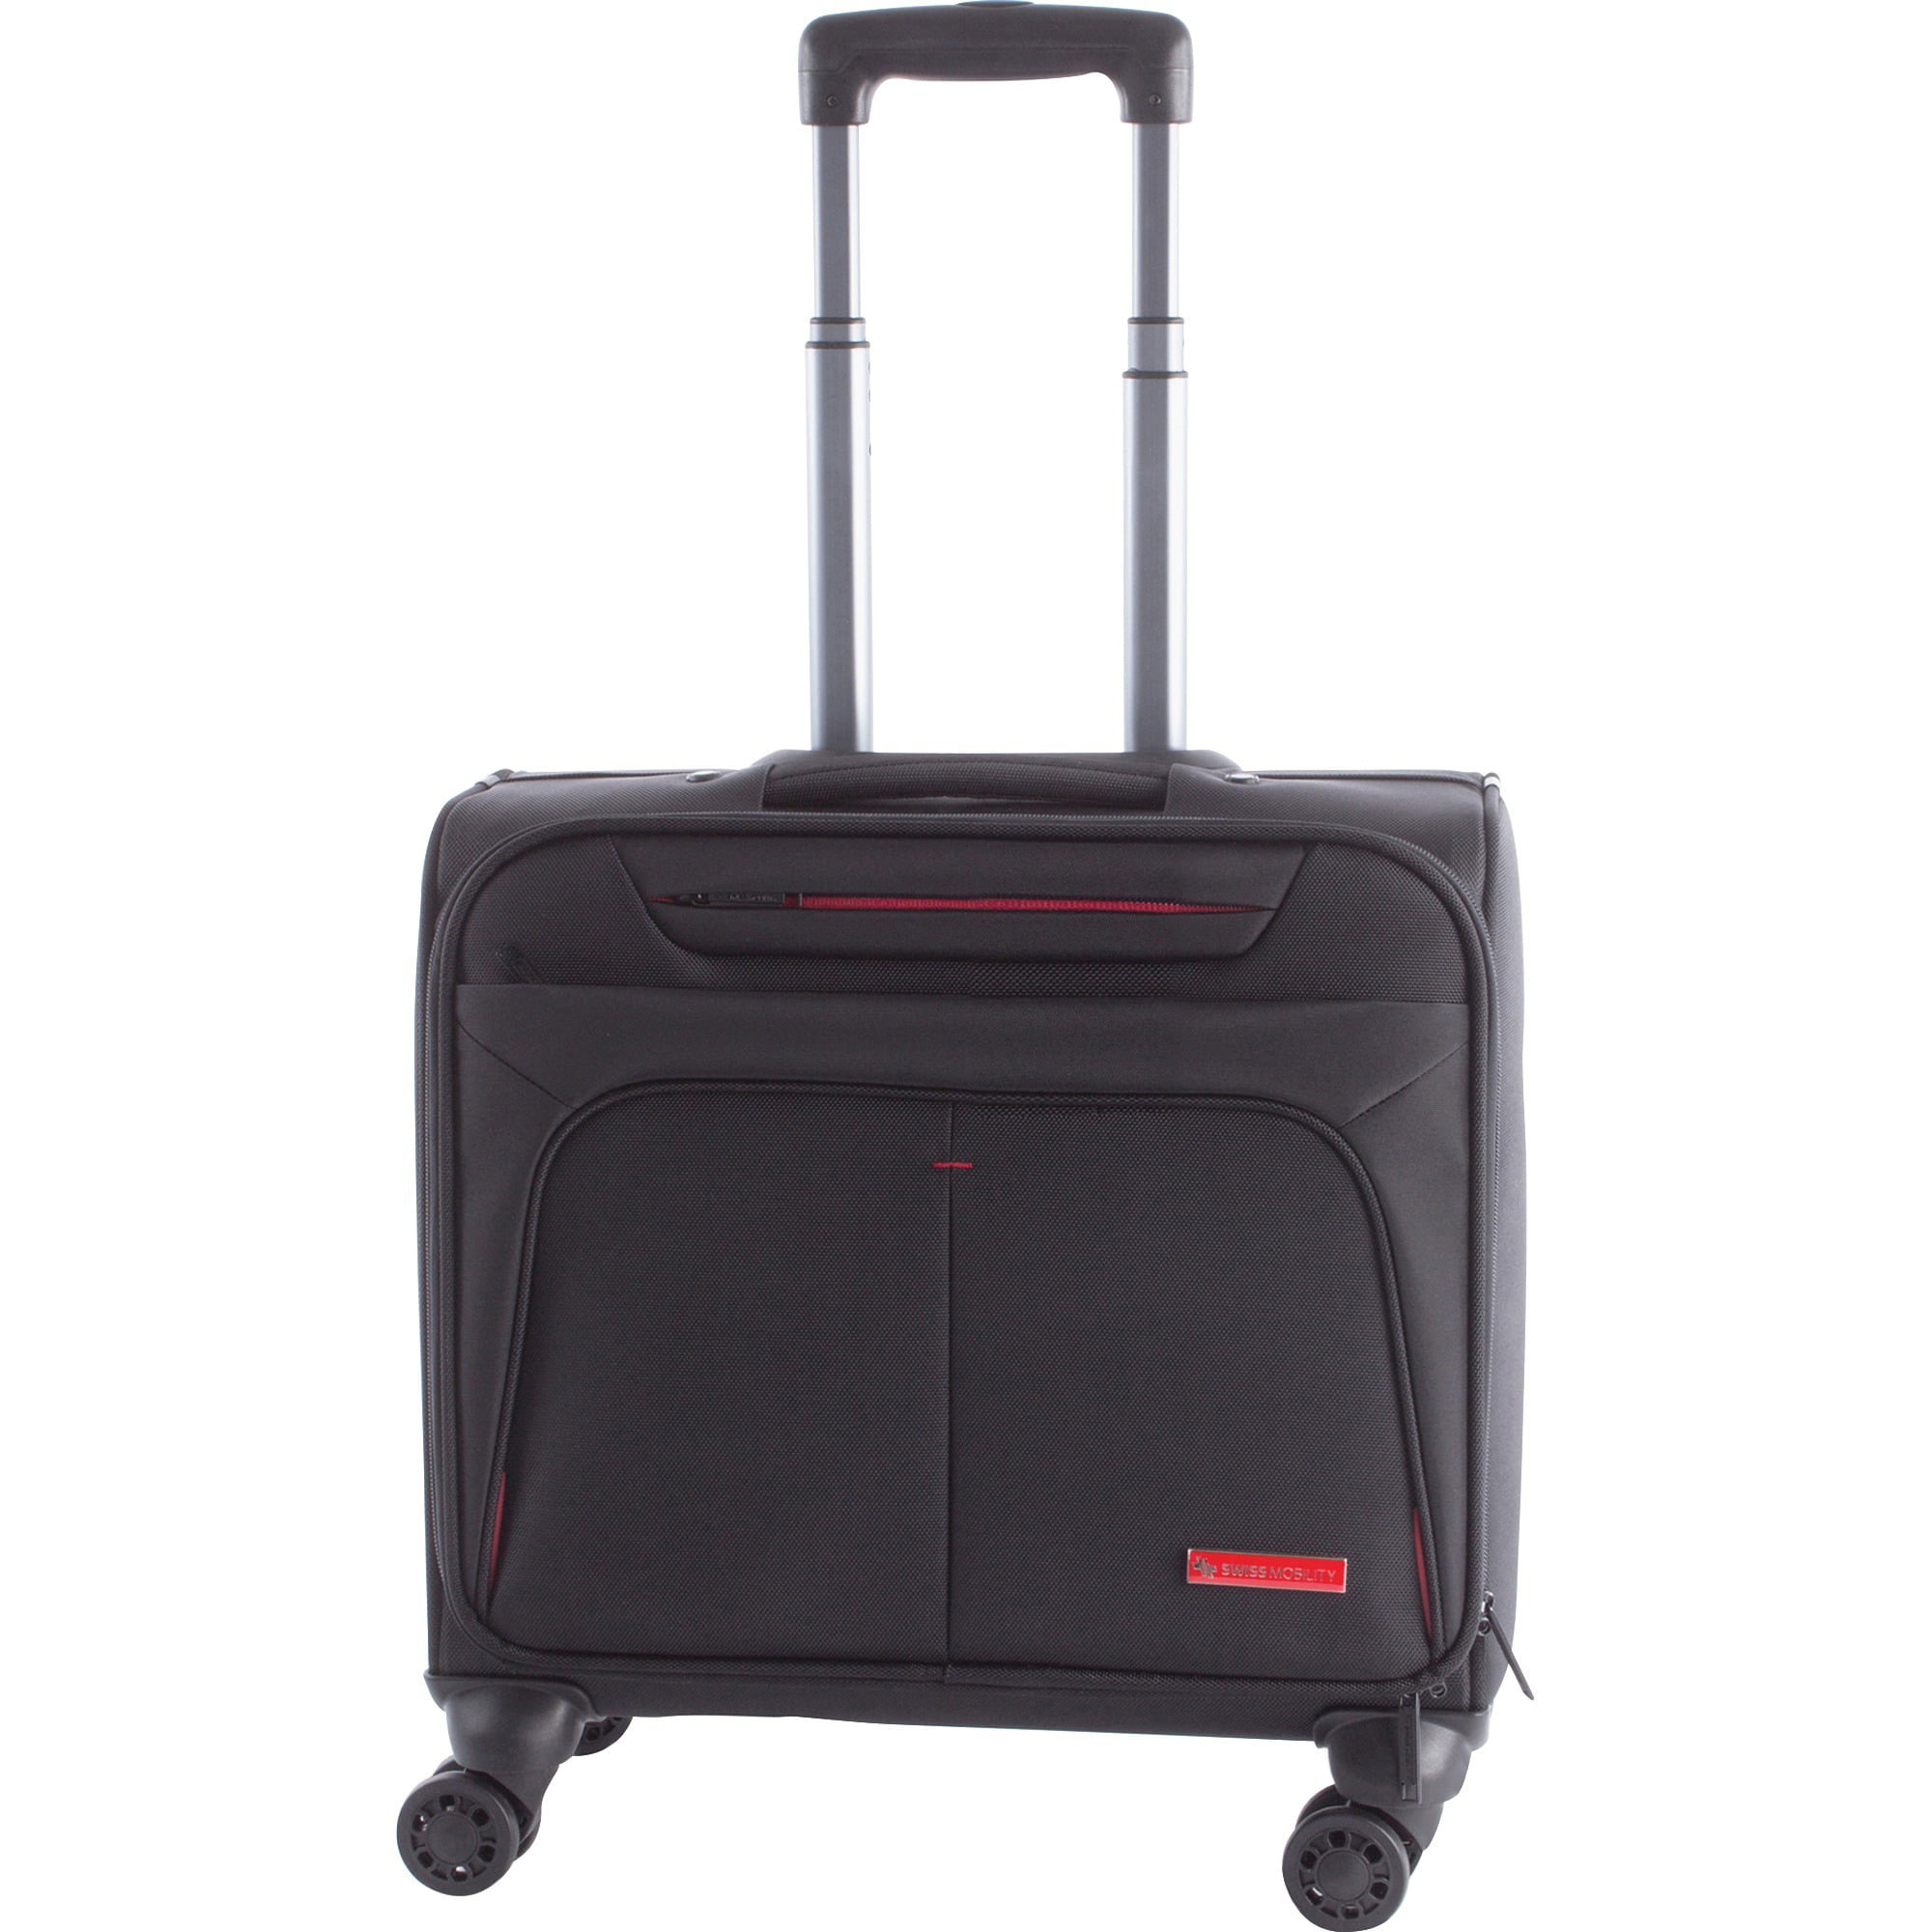 Swiss Mobility Wheeled Business Case Black